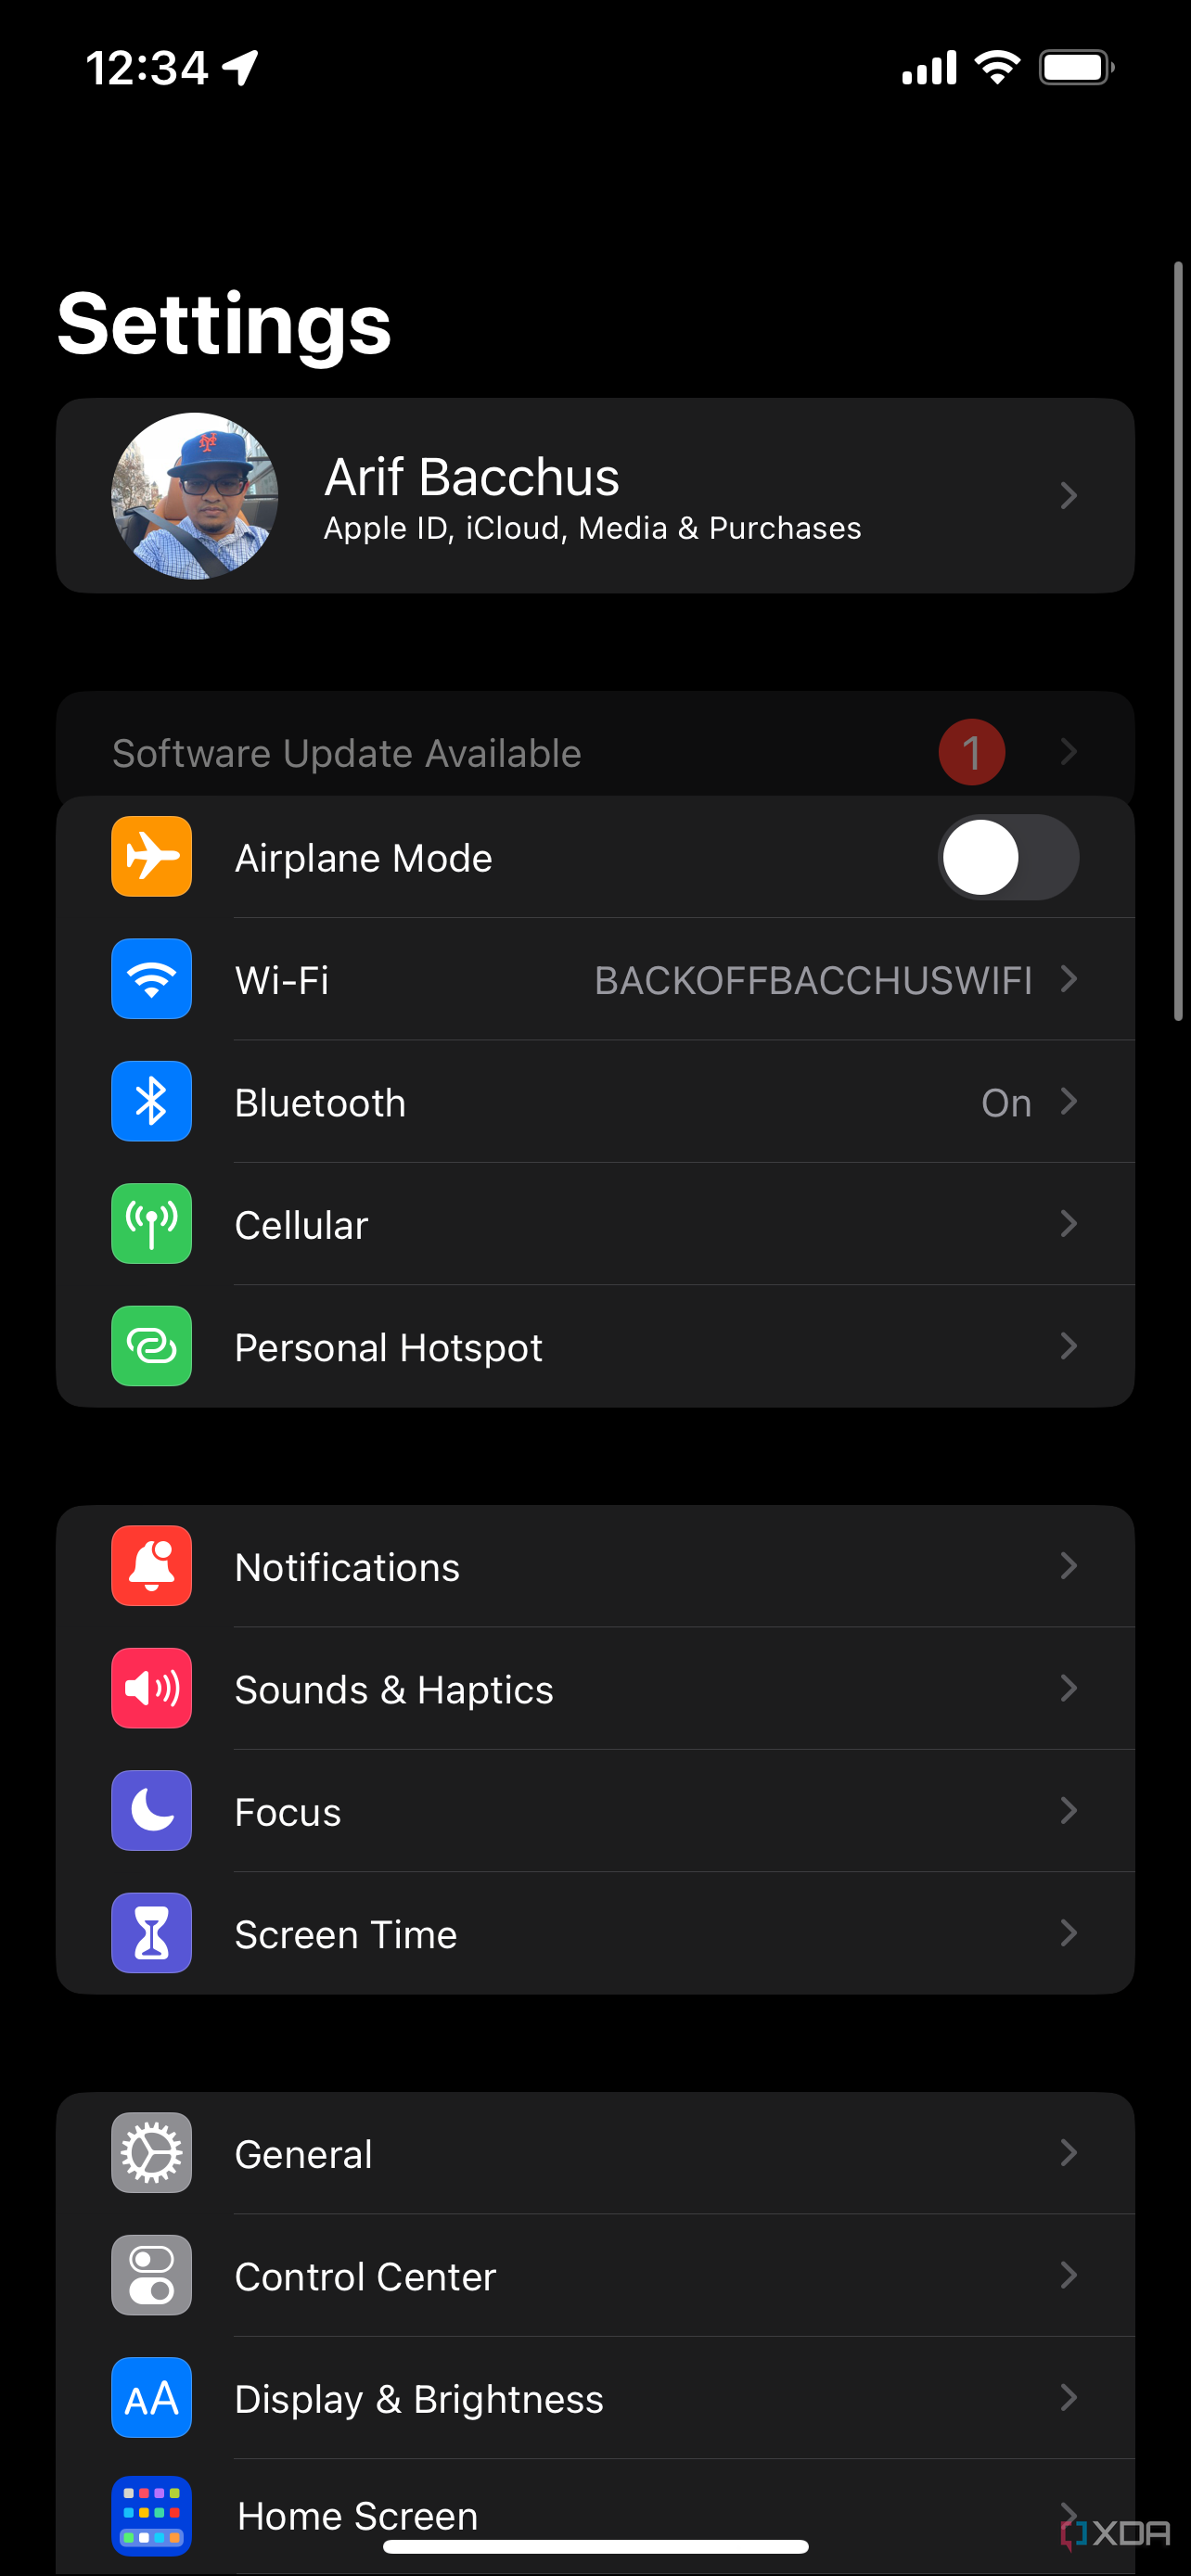 The main iOS Settings page